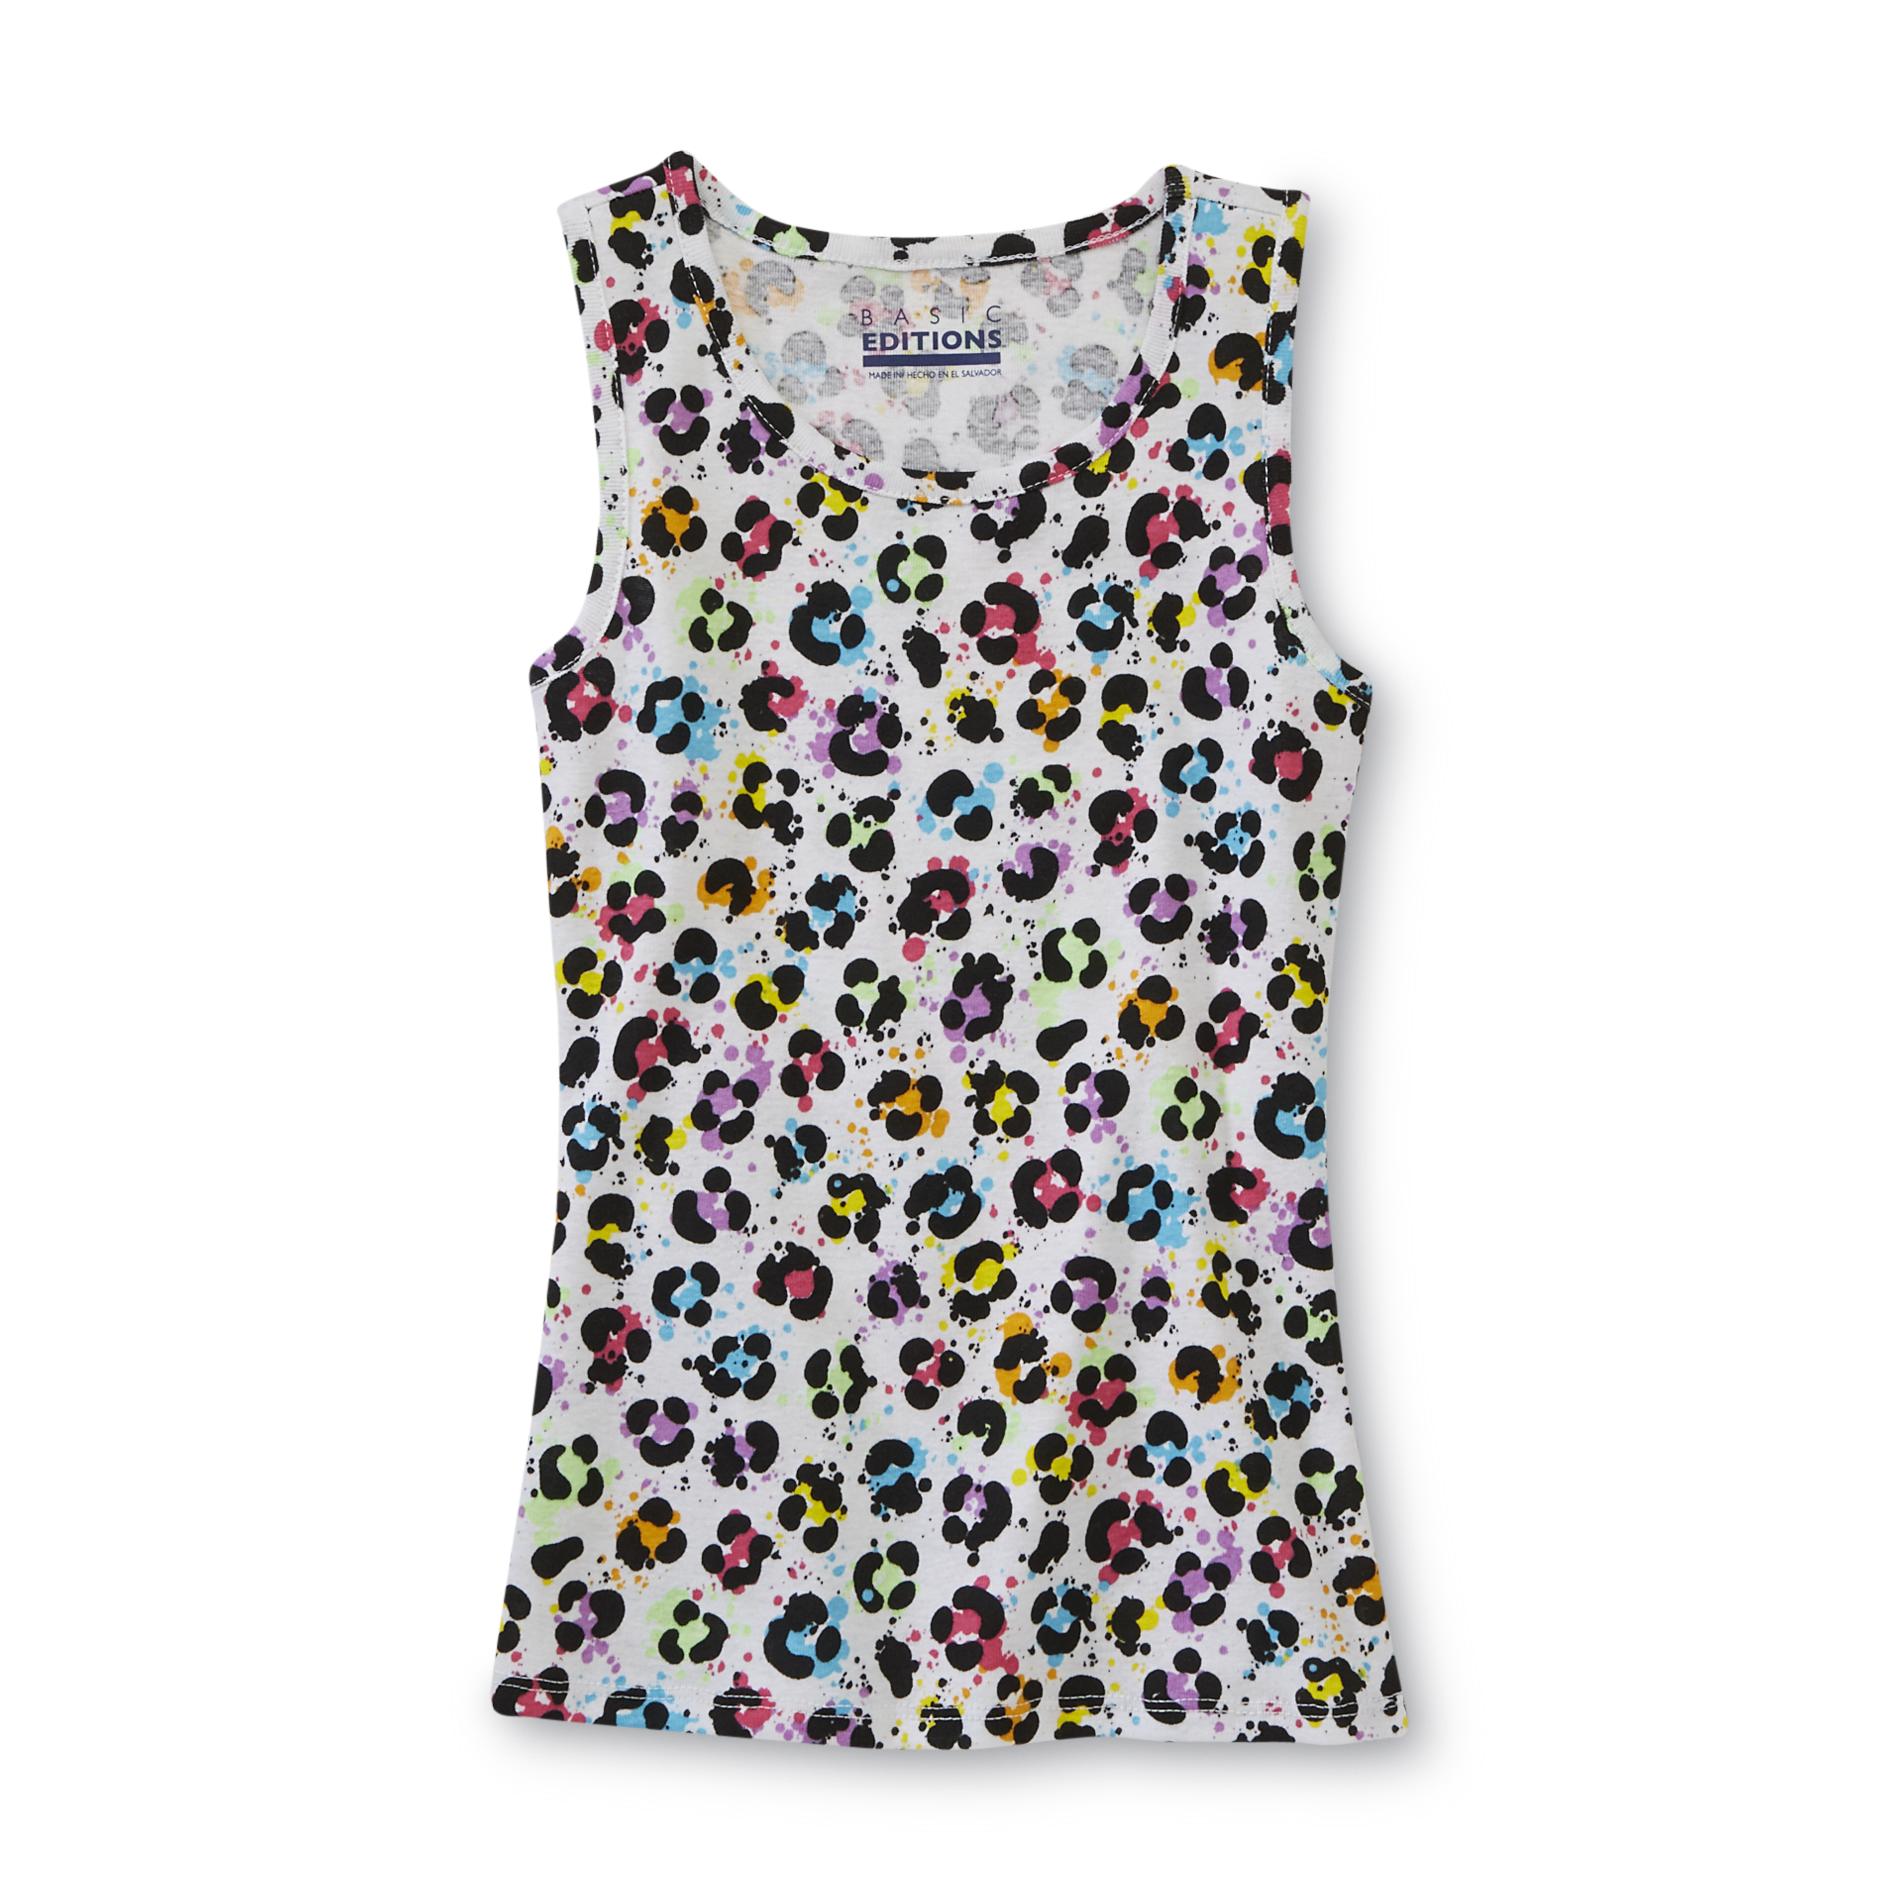 Basic Editions Girl's Knit Tank Top - Leopard Print